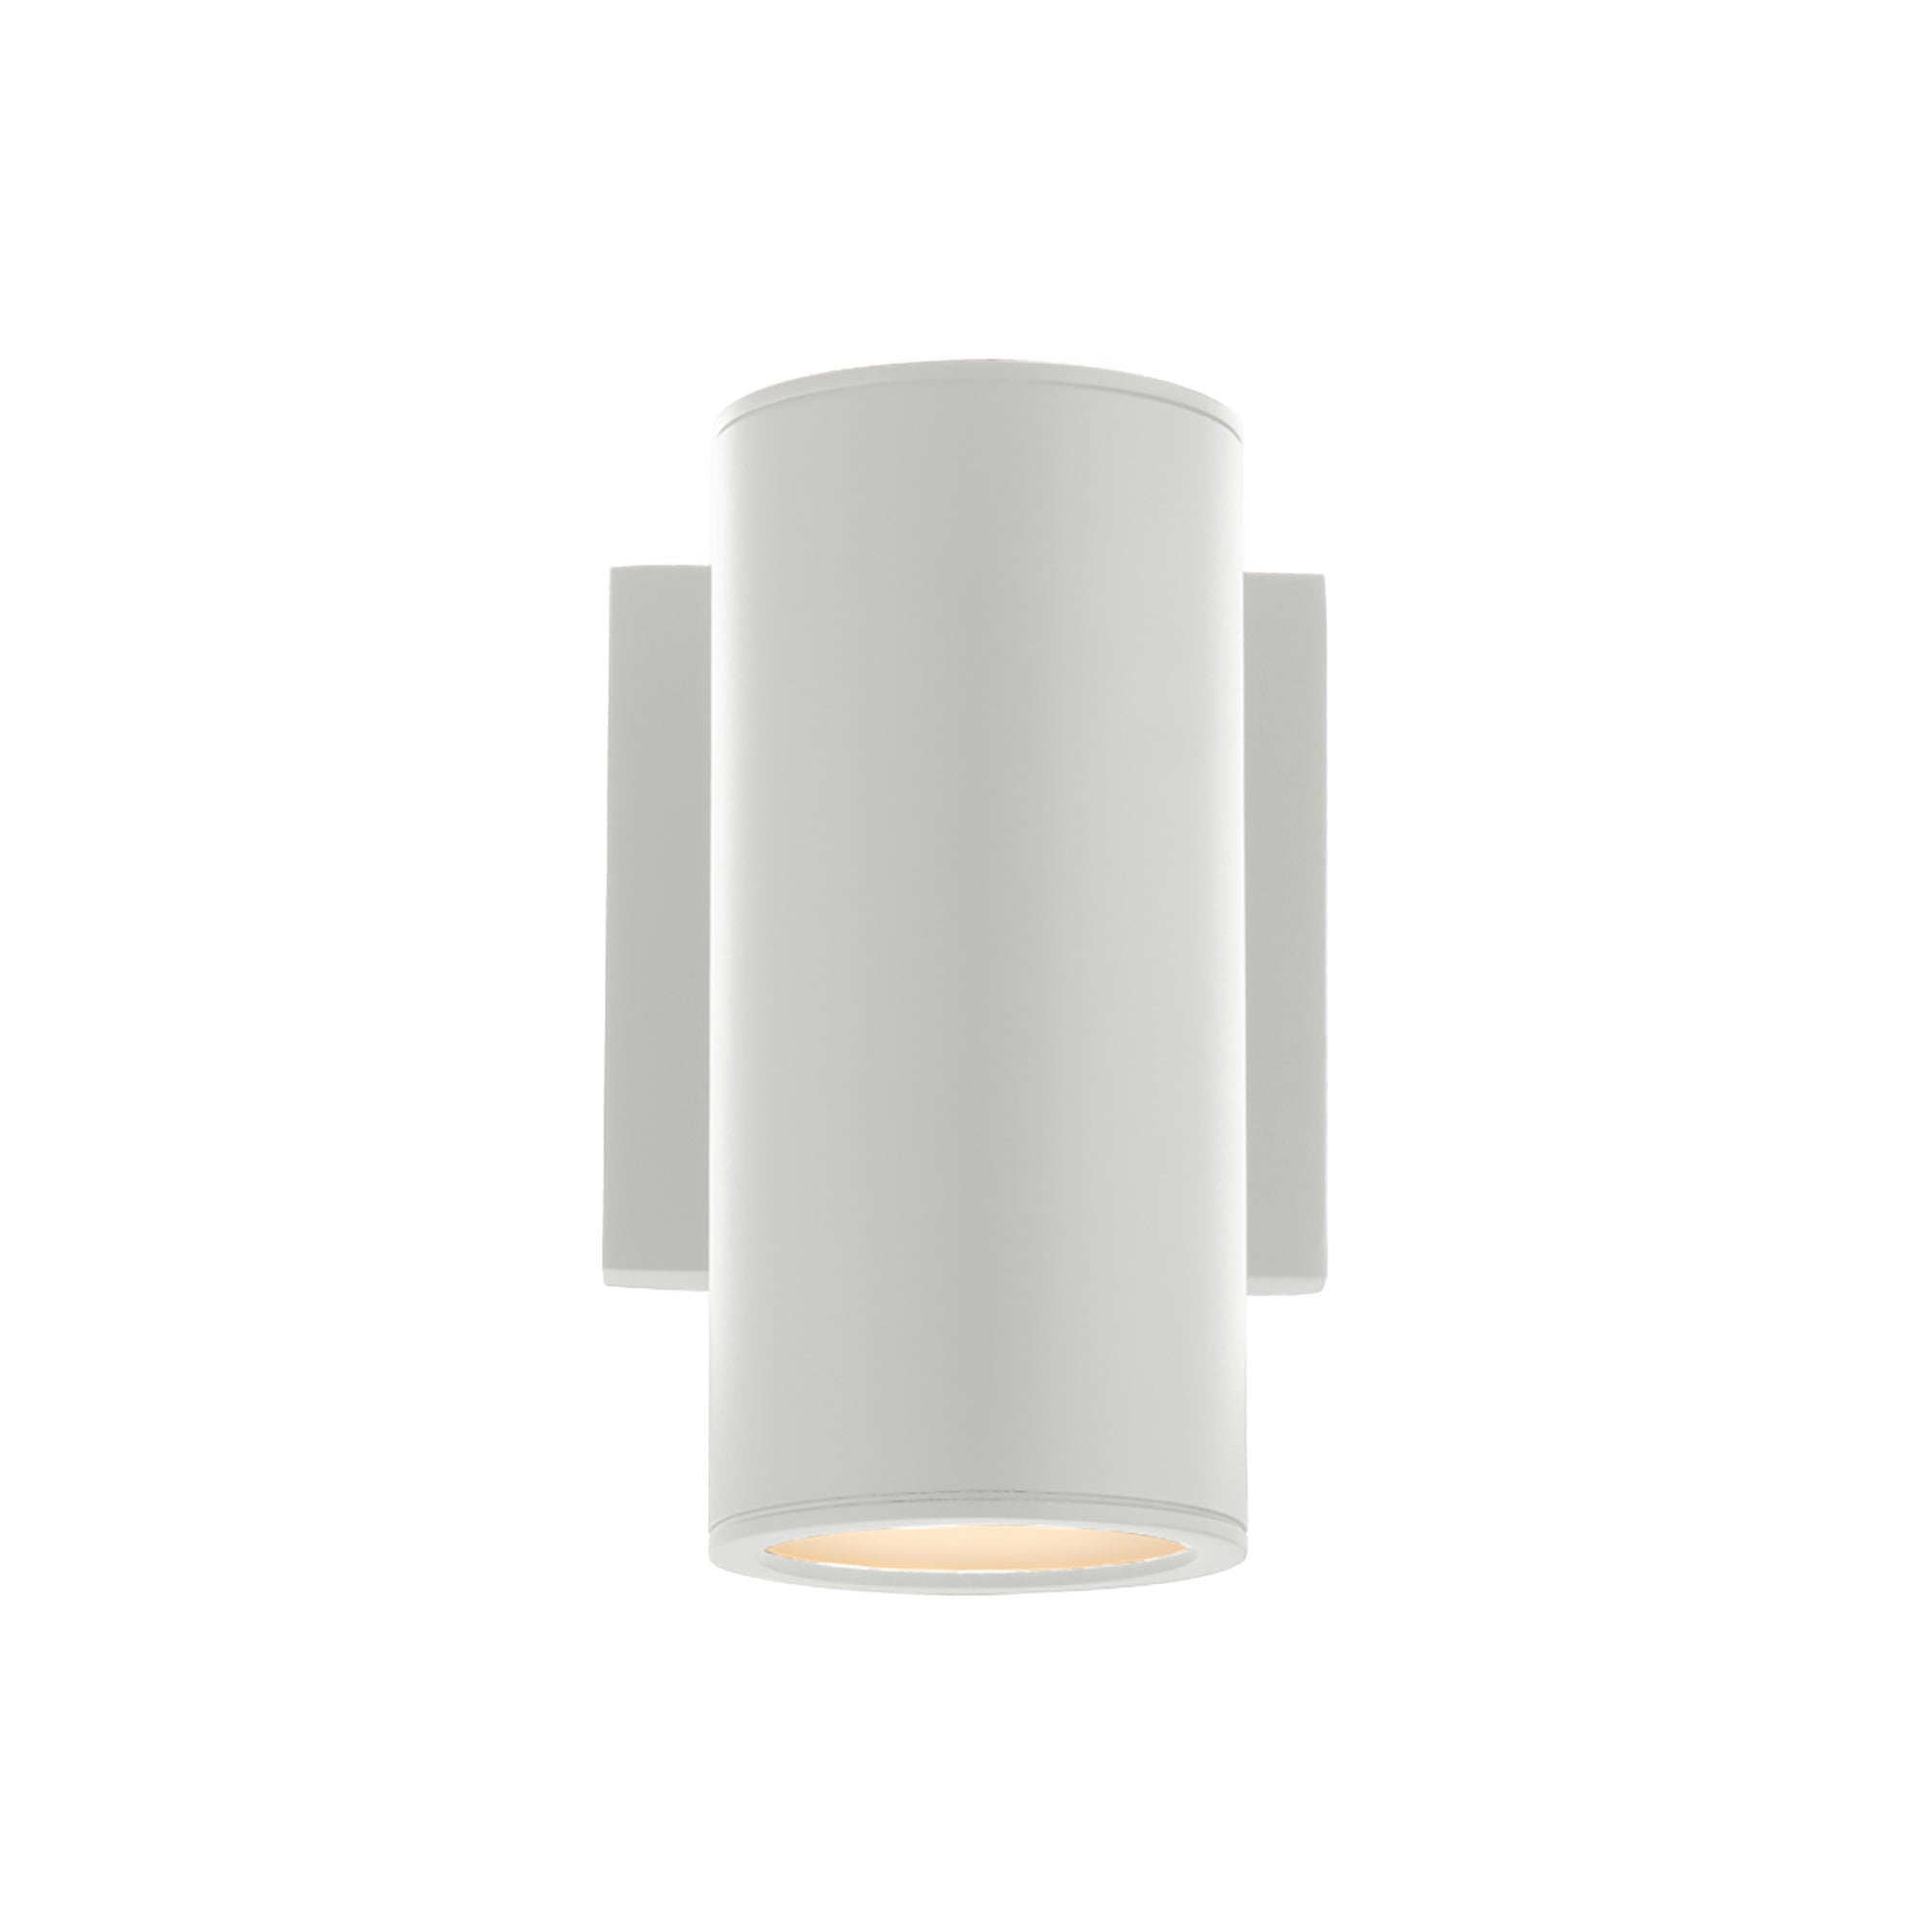 Cylinder LED Single Up or Down Indoor/Outdoor Wall Light